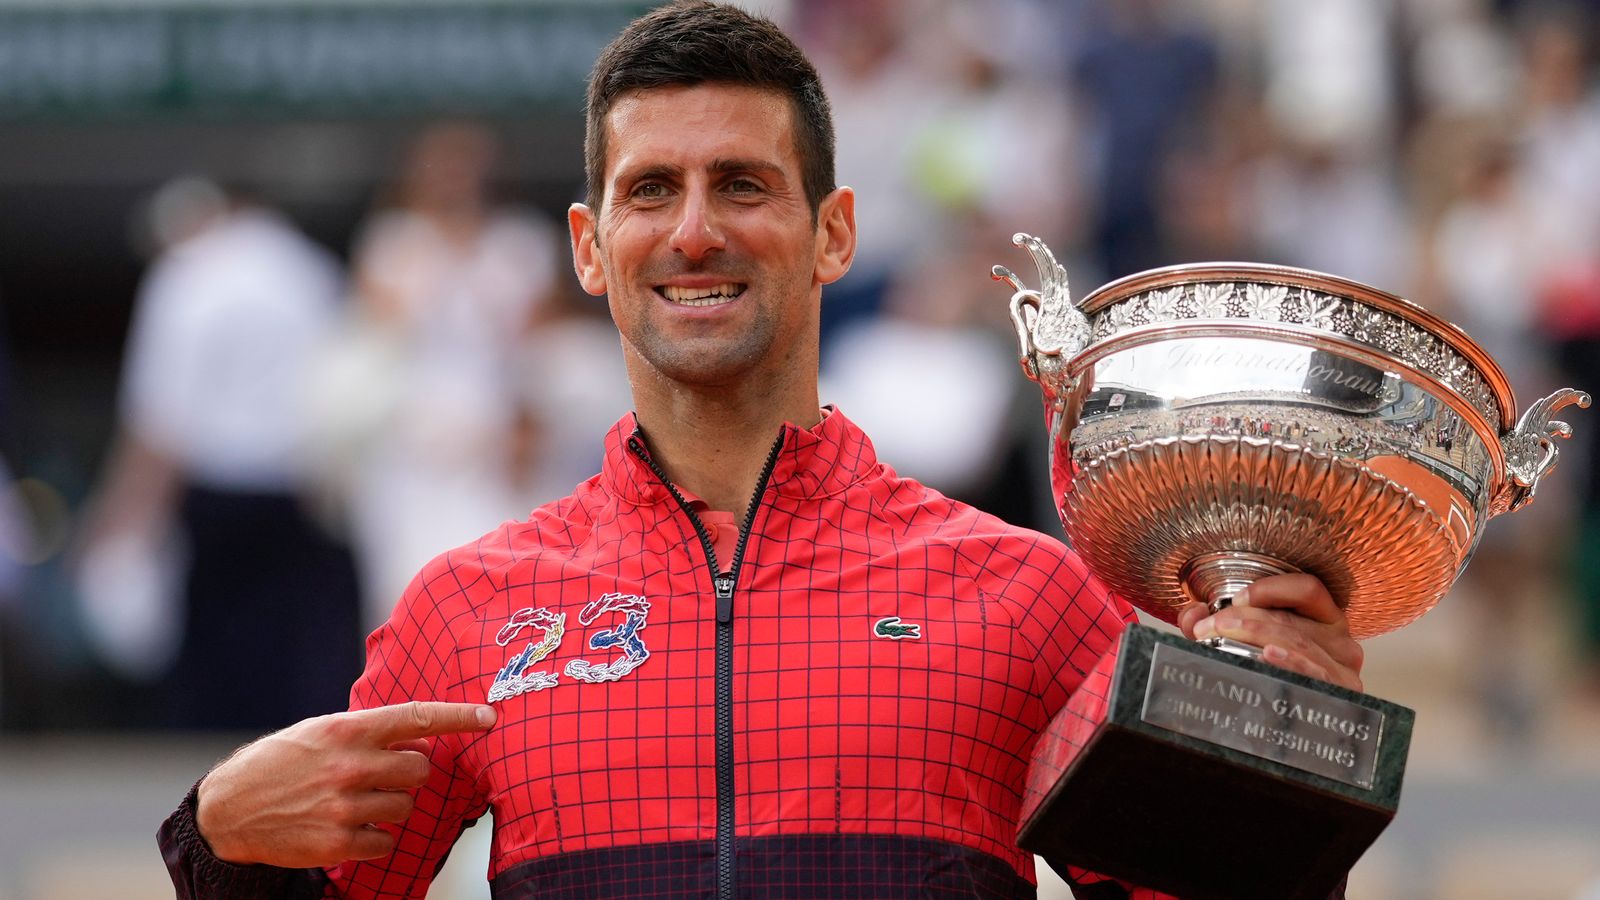 French Open Novak Djokovic says he will leave GOAT discussion for